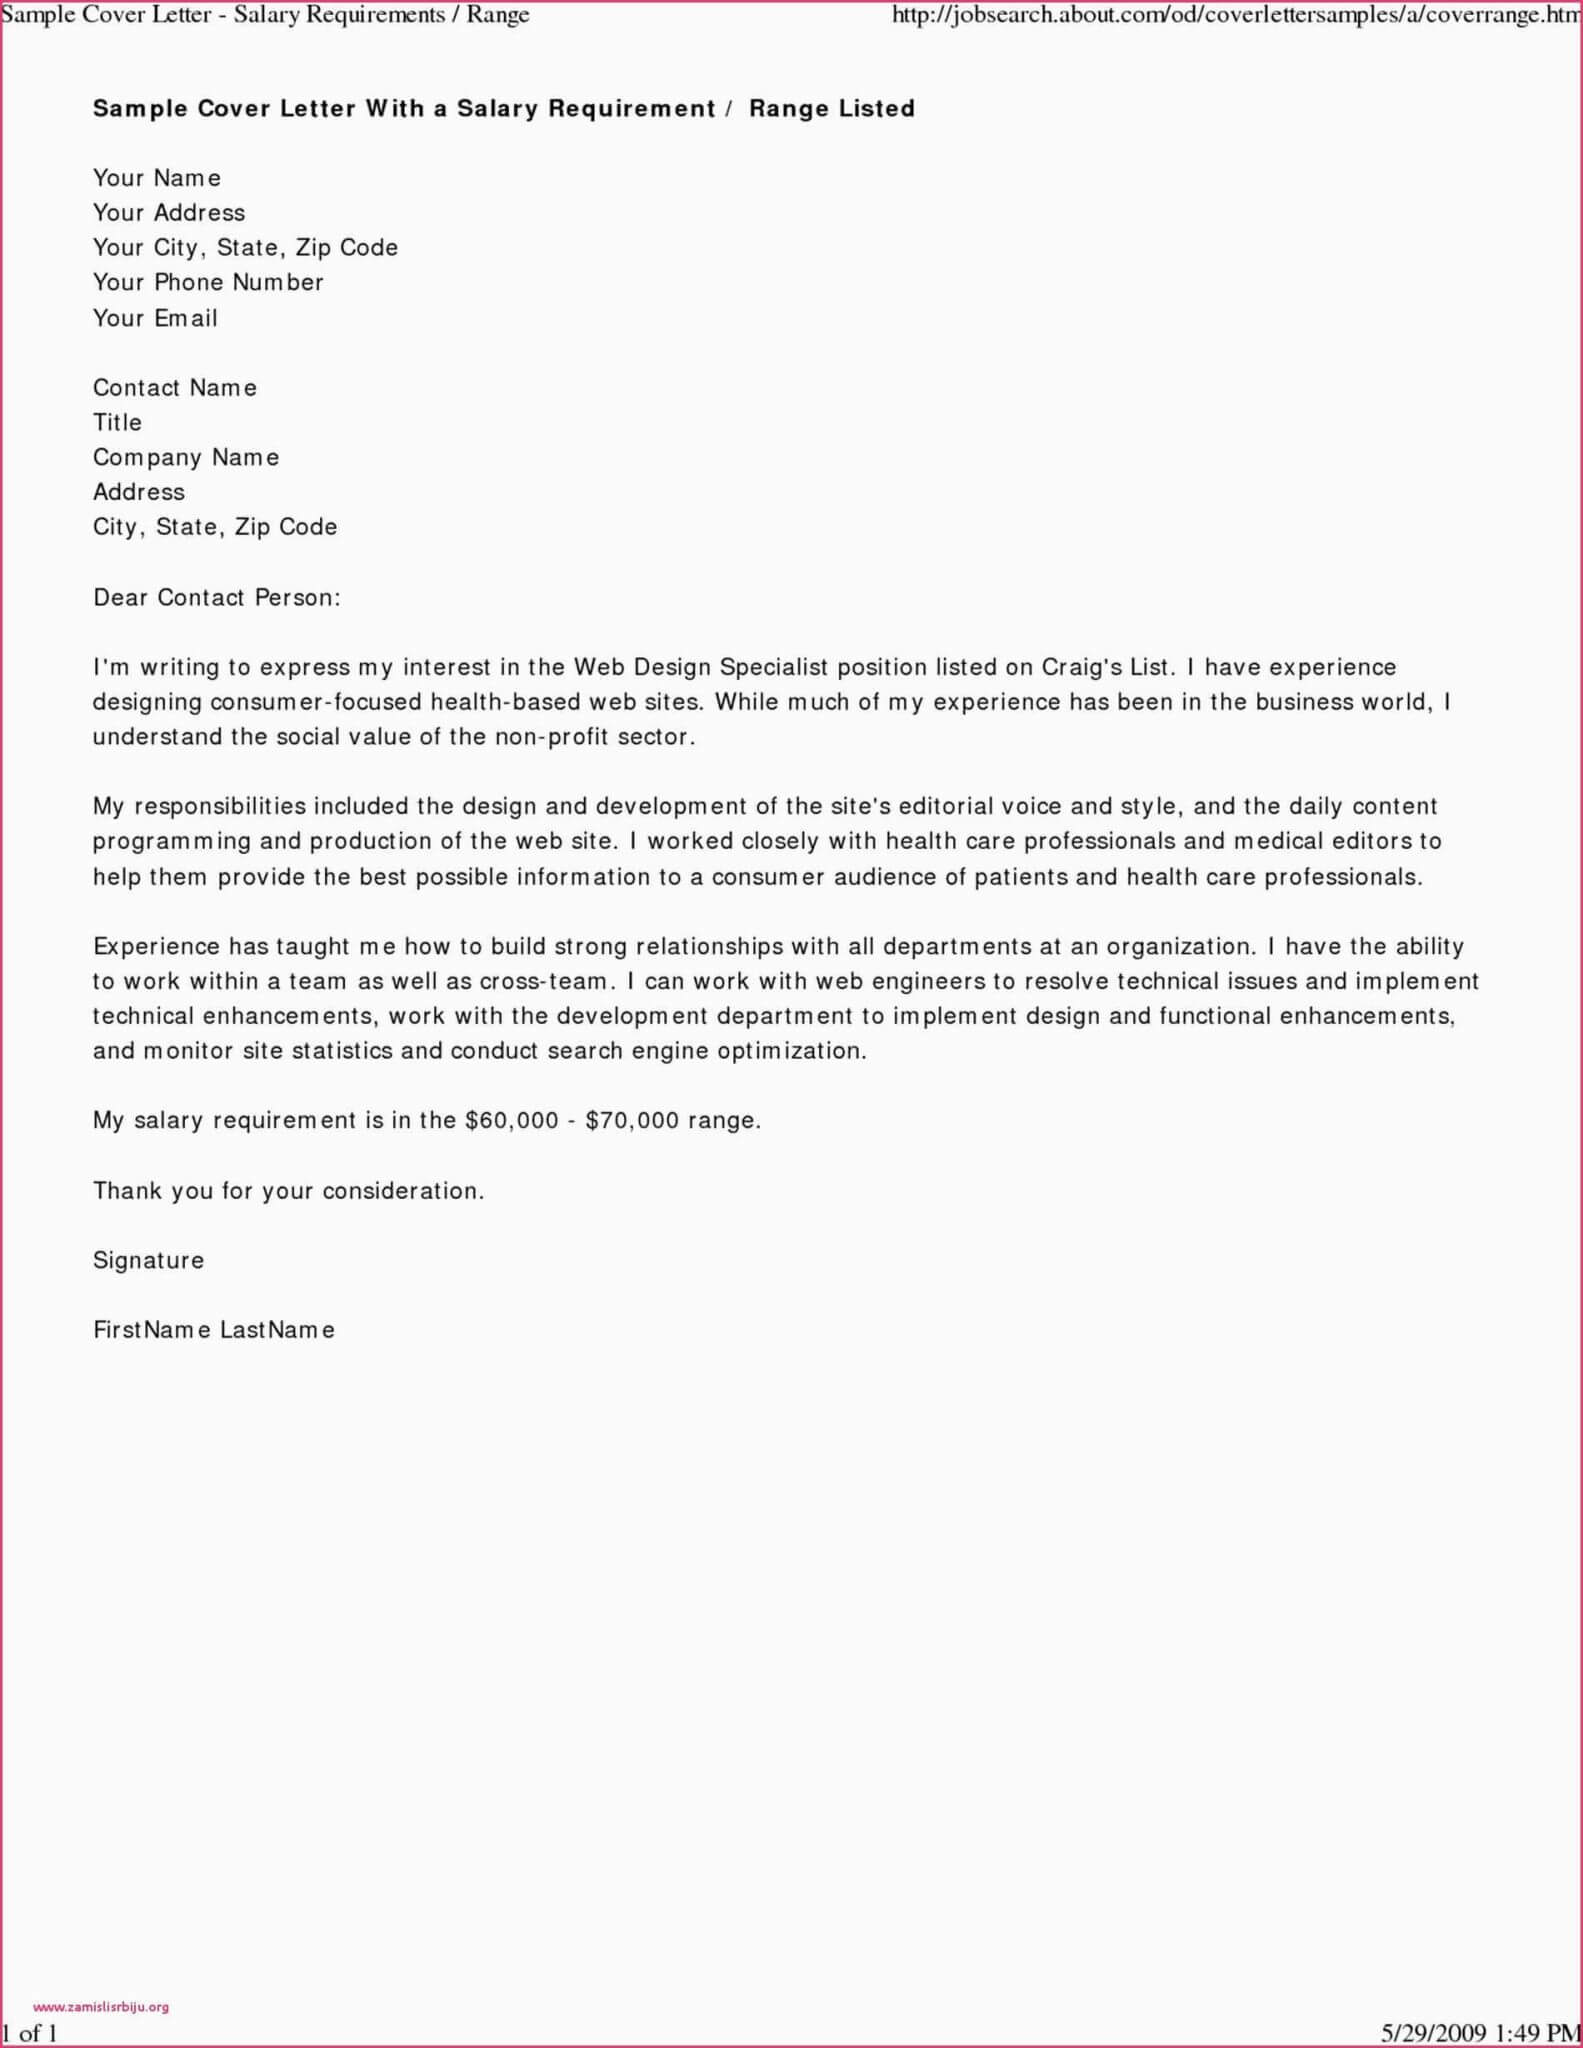 Sample Letter Requesting Sales Tax Exemption Certificate With Resale Certificate Request Letter Template